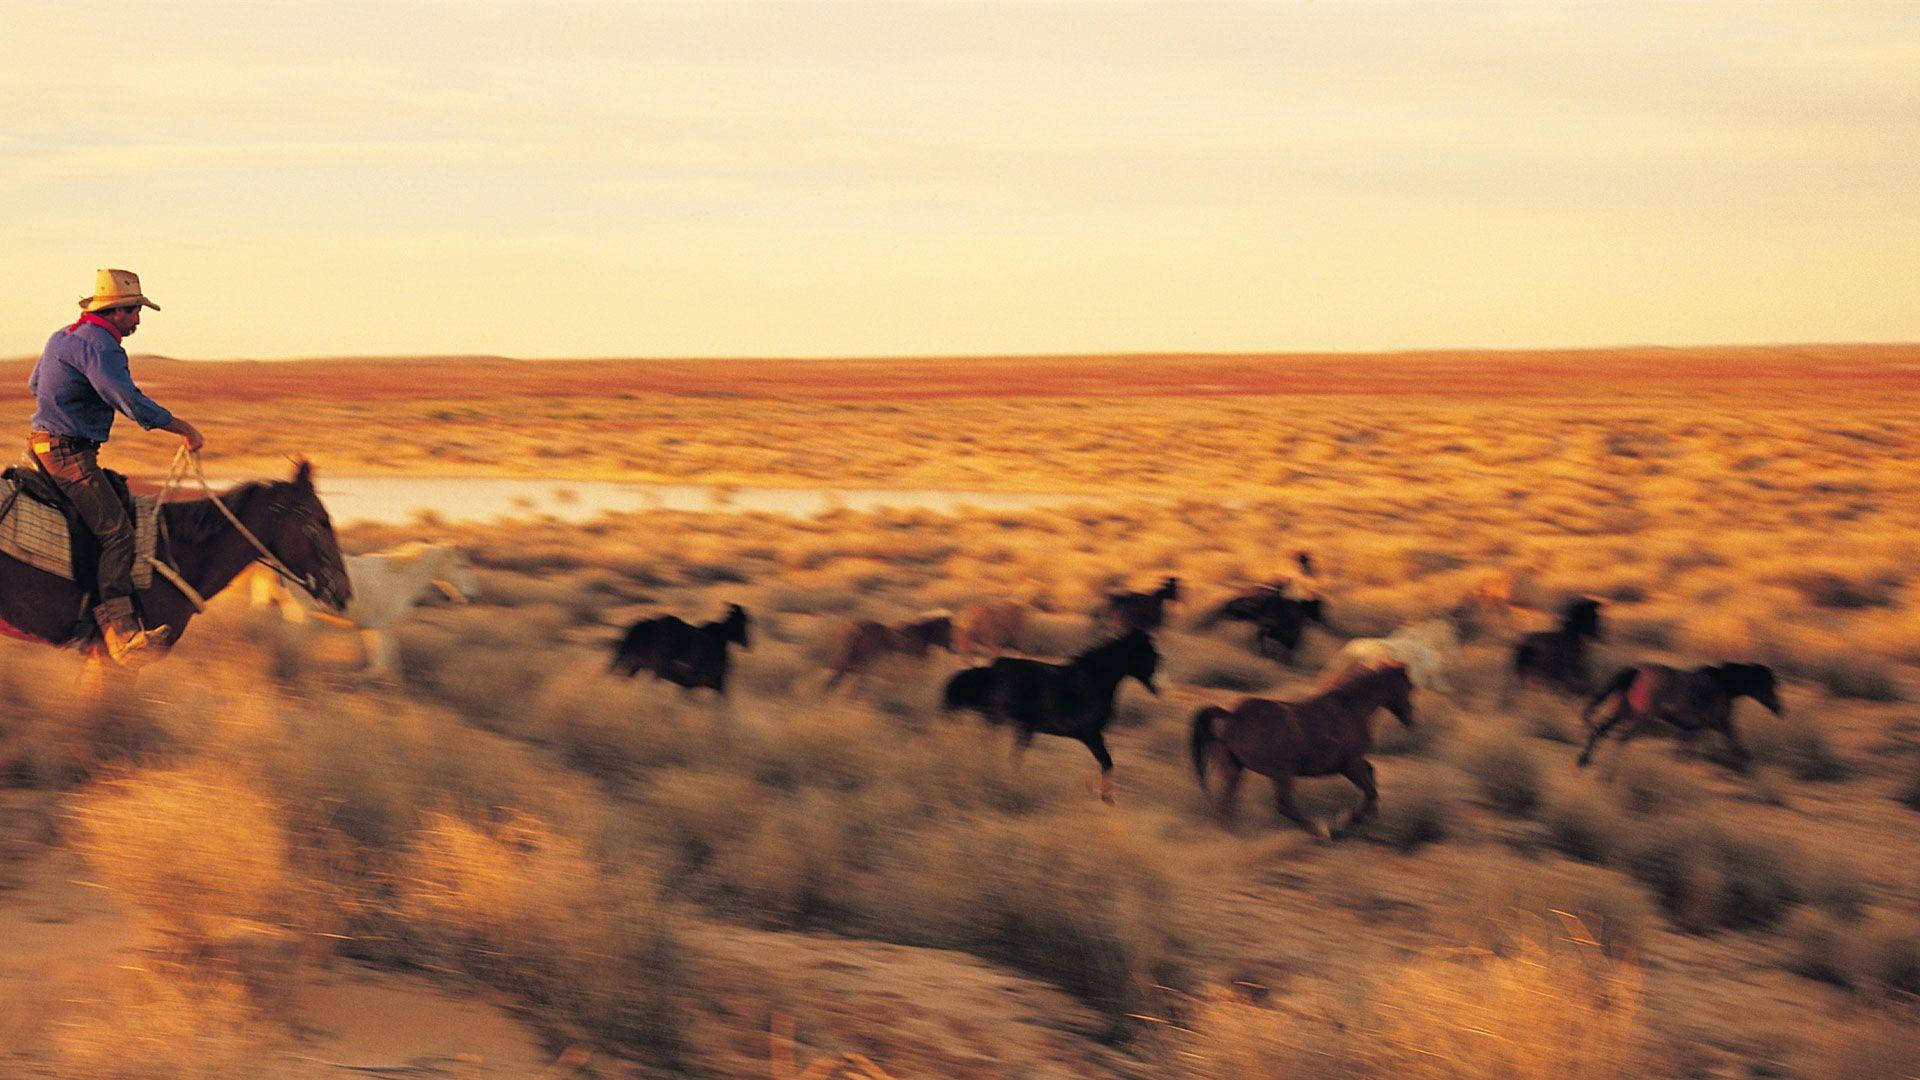 Australian Outback Horse Riding Background